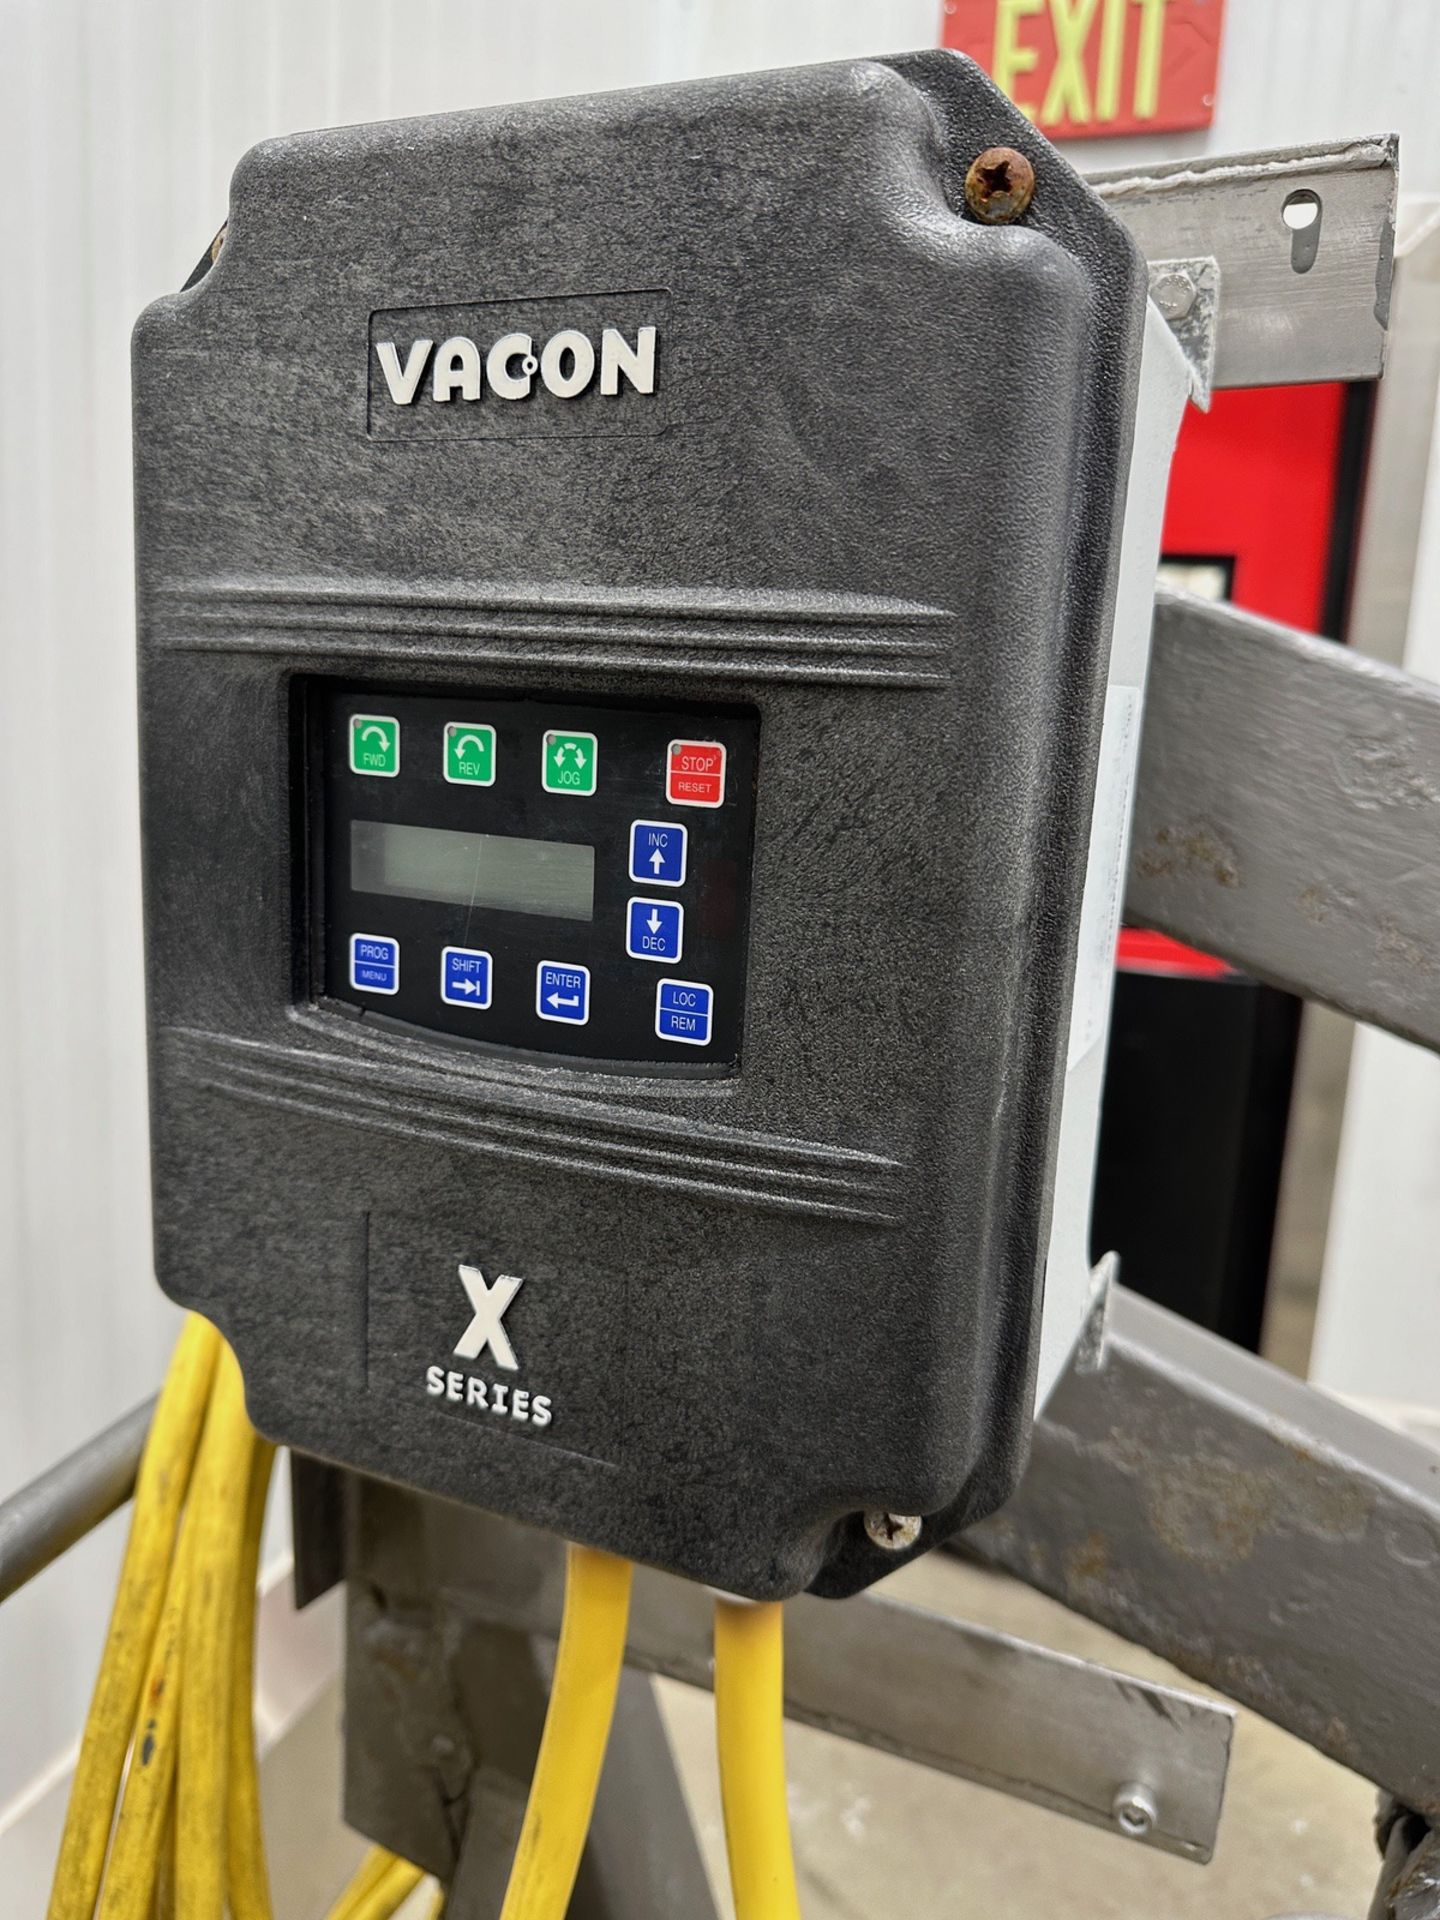 7.5 HP High Speed Disperser and Mobile Gantry Mount, Vacon X Series VS Control | Rig Fee $200 - Image 3 of 3